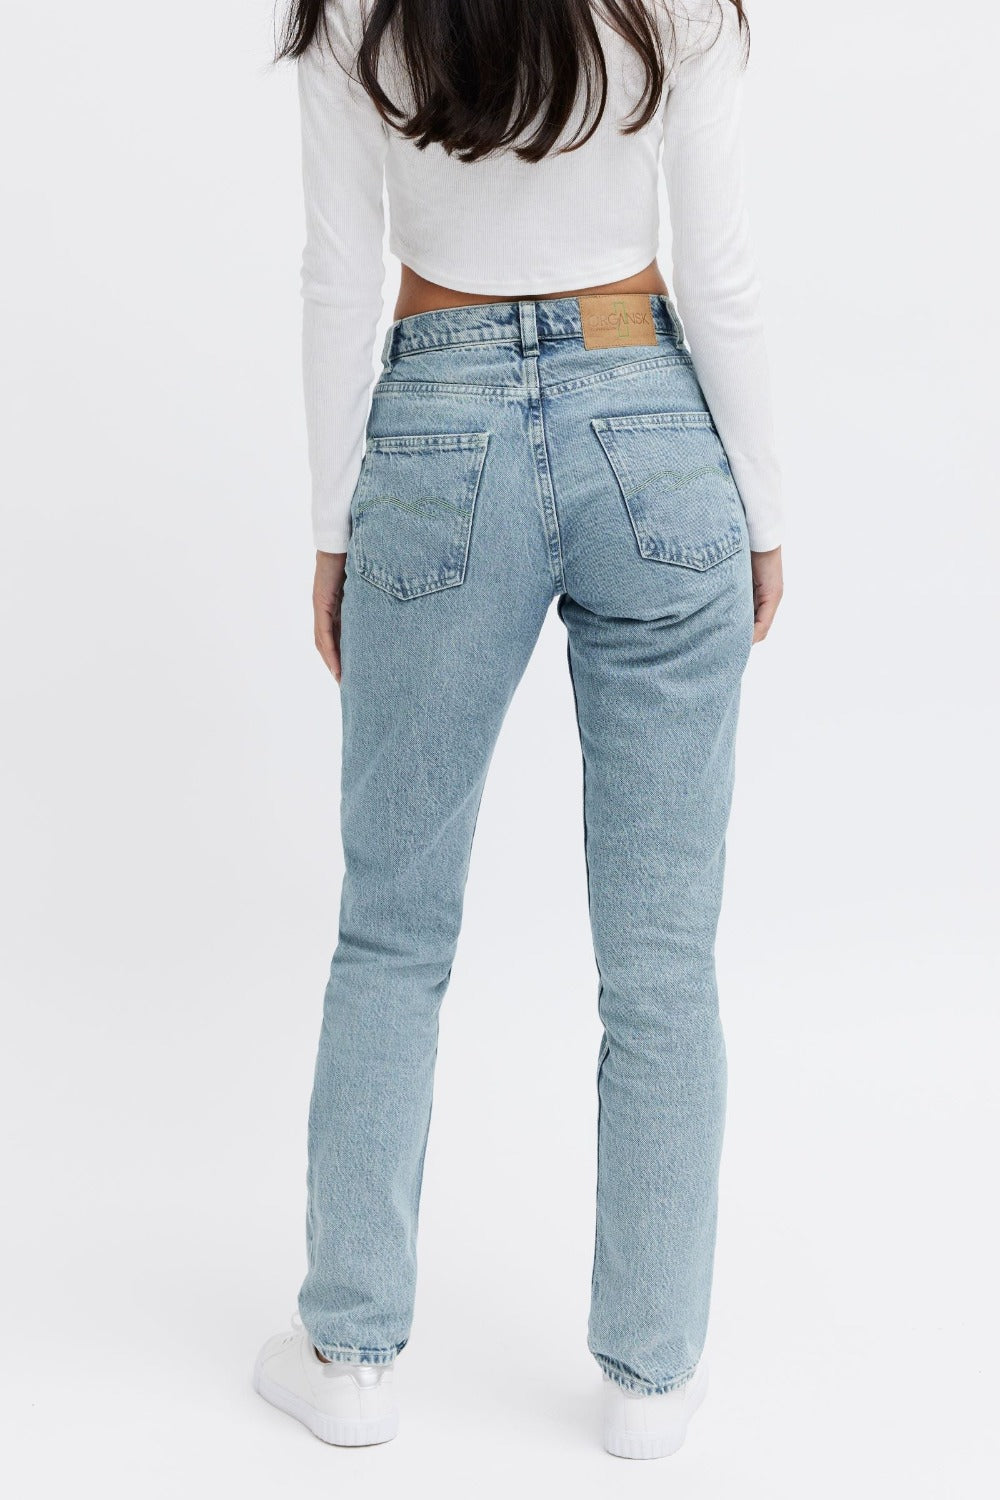 Denim Jeans - Lease jeans, rent or buy - 100% Organic Cotton - GOTS certified